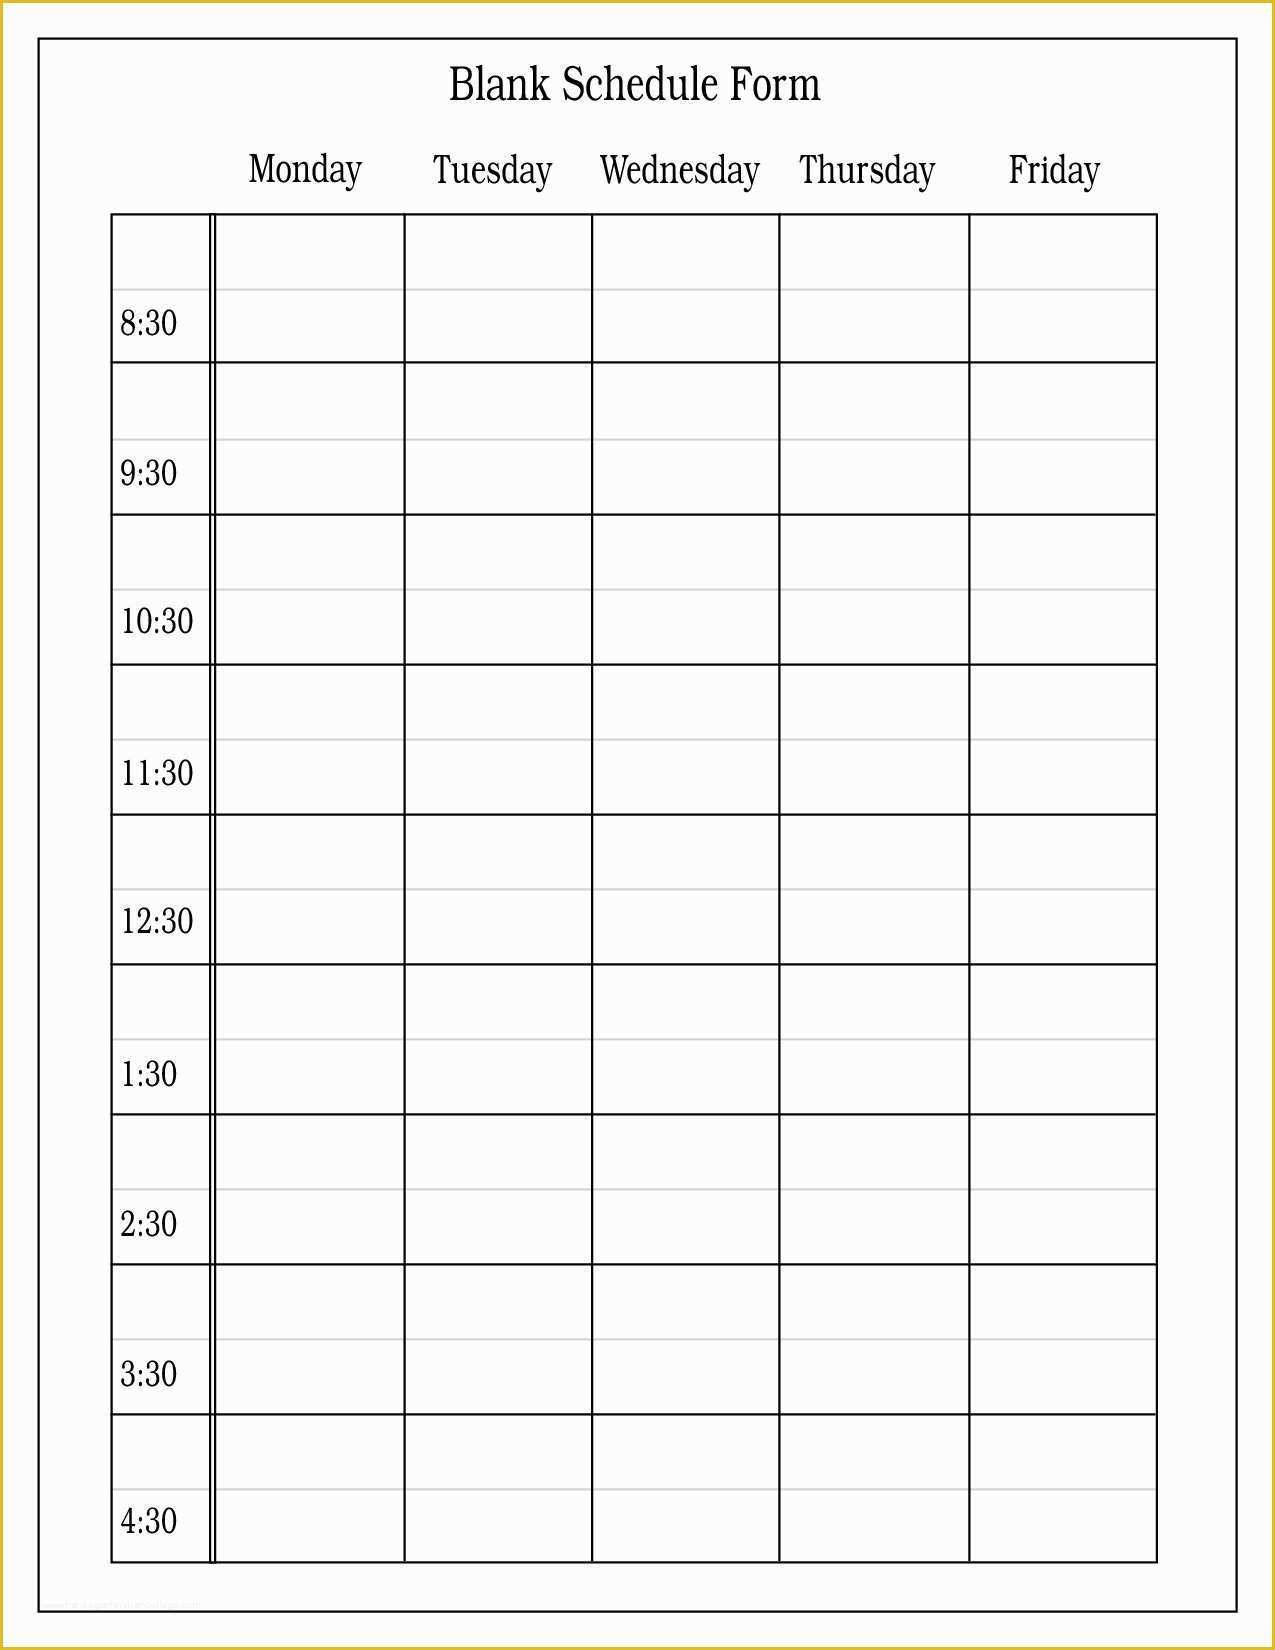 Employee Schedule Template Free Download Of 6 Week Blank Calendar Template – Template Calendar Design